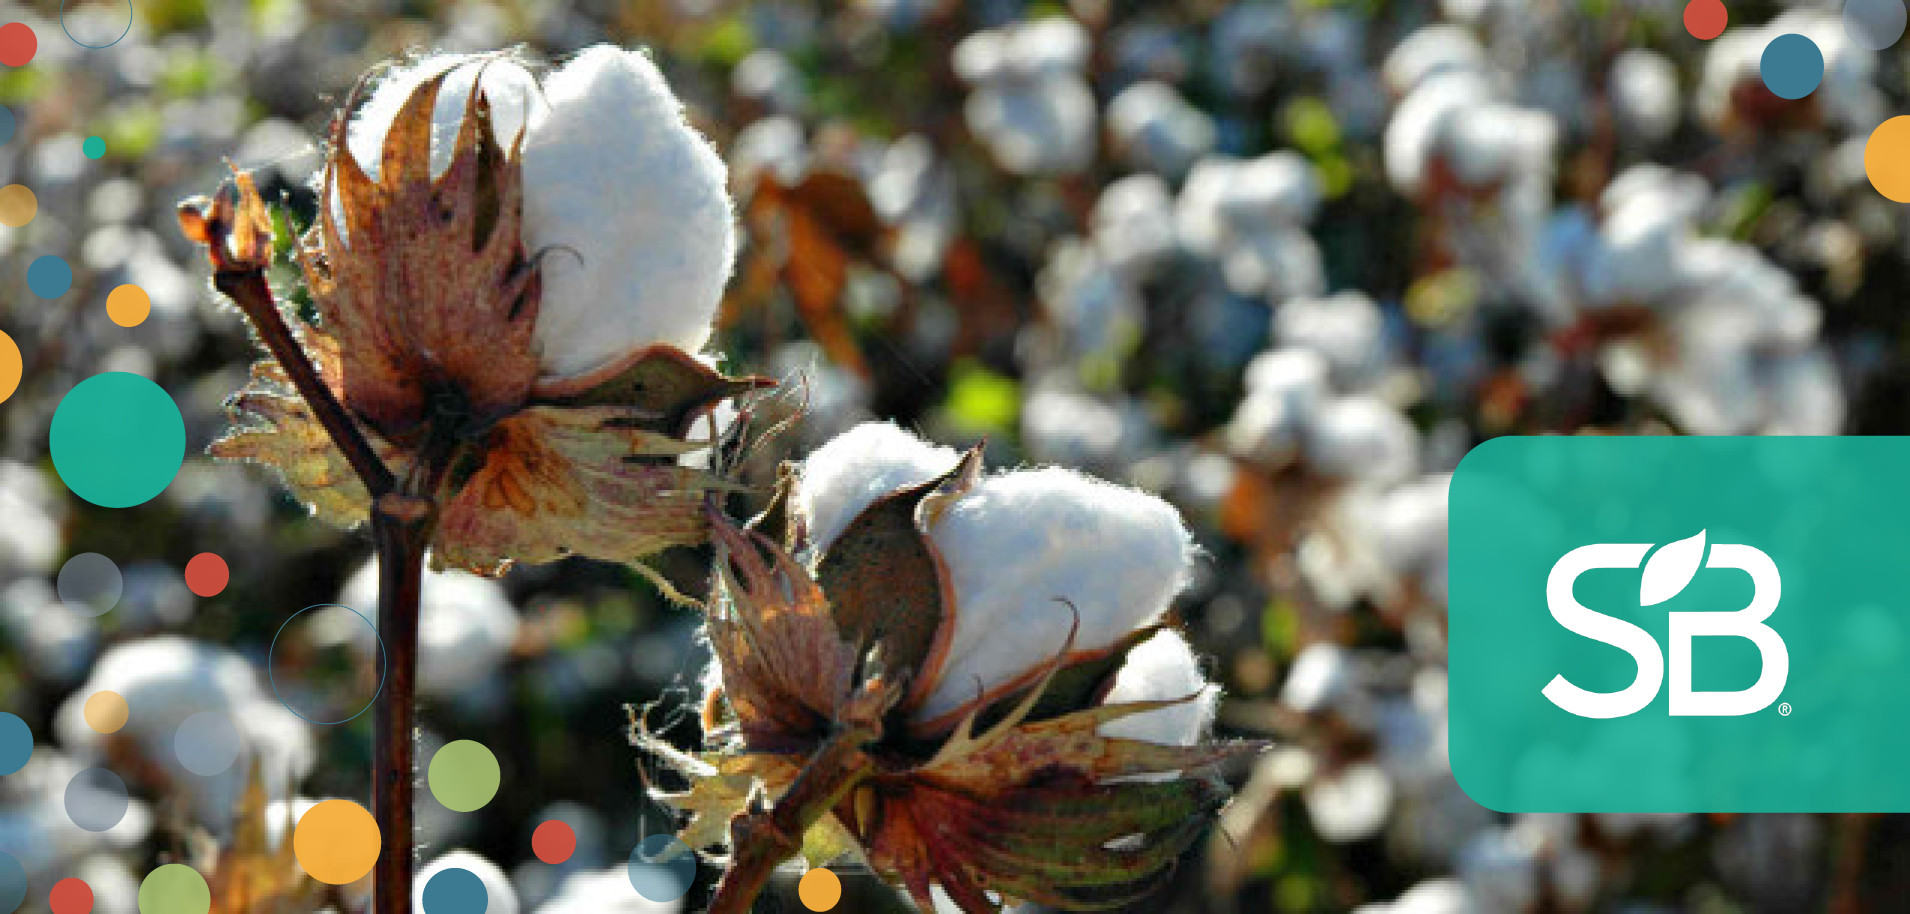 IKEA Says 100% of Its Cotton Now Comes from More Sustainable